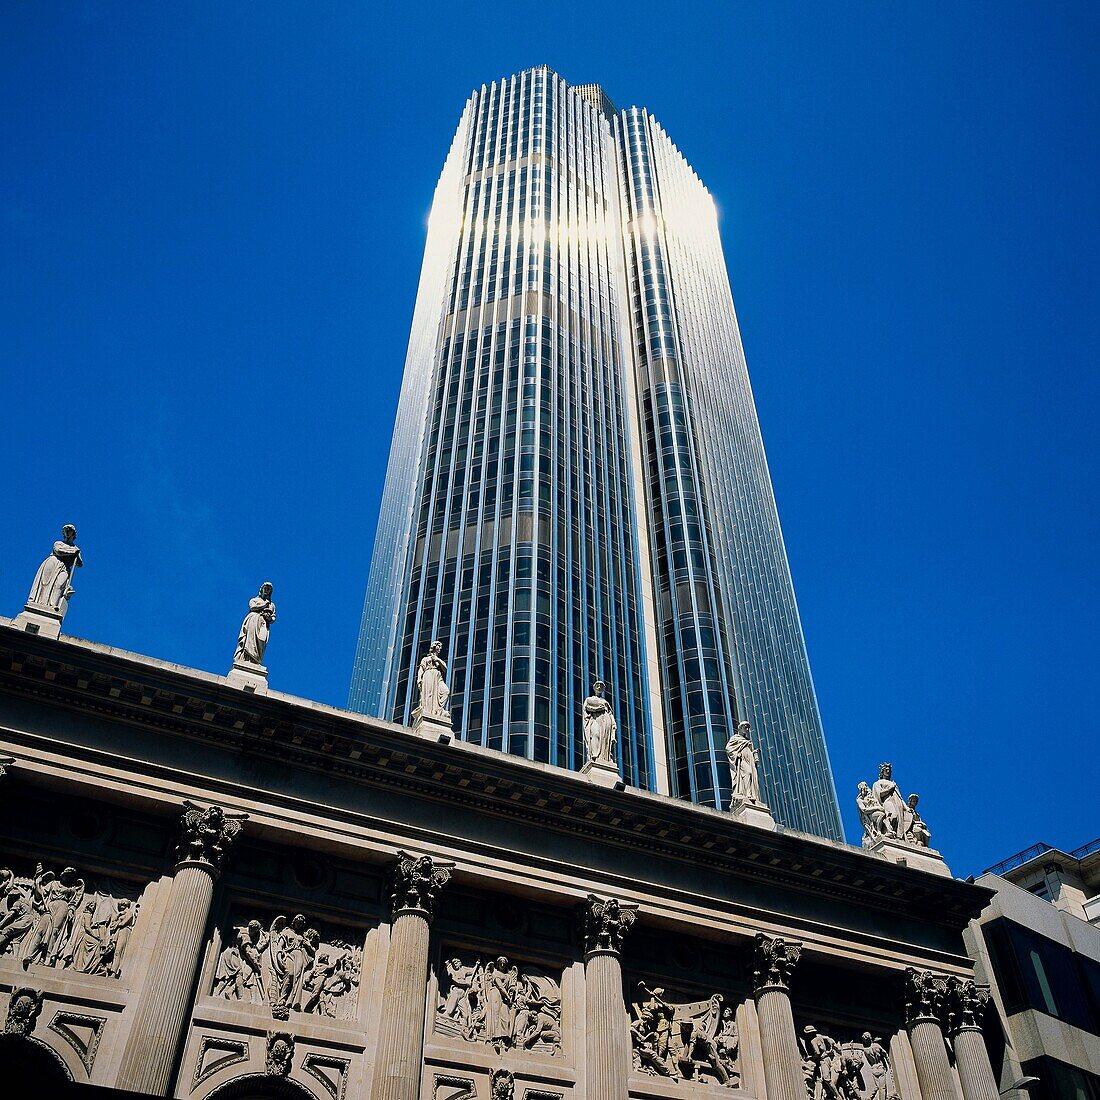 Statues on Gibson hall & tower 42, former Natwest National Westminster, London, Great-Britain